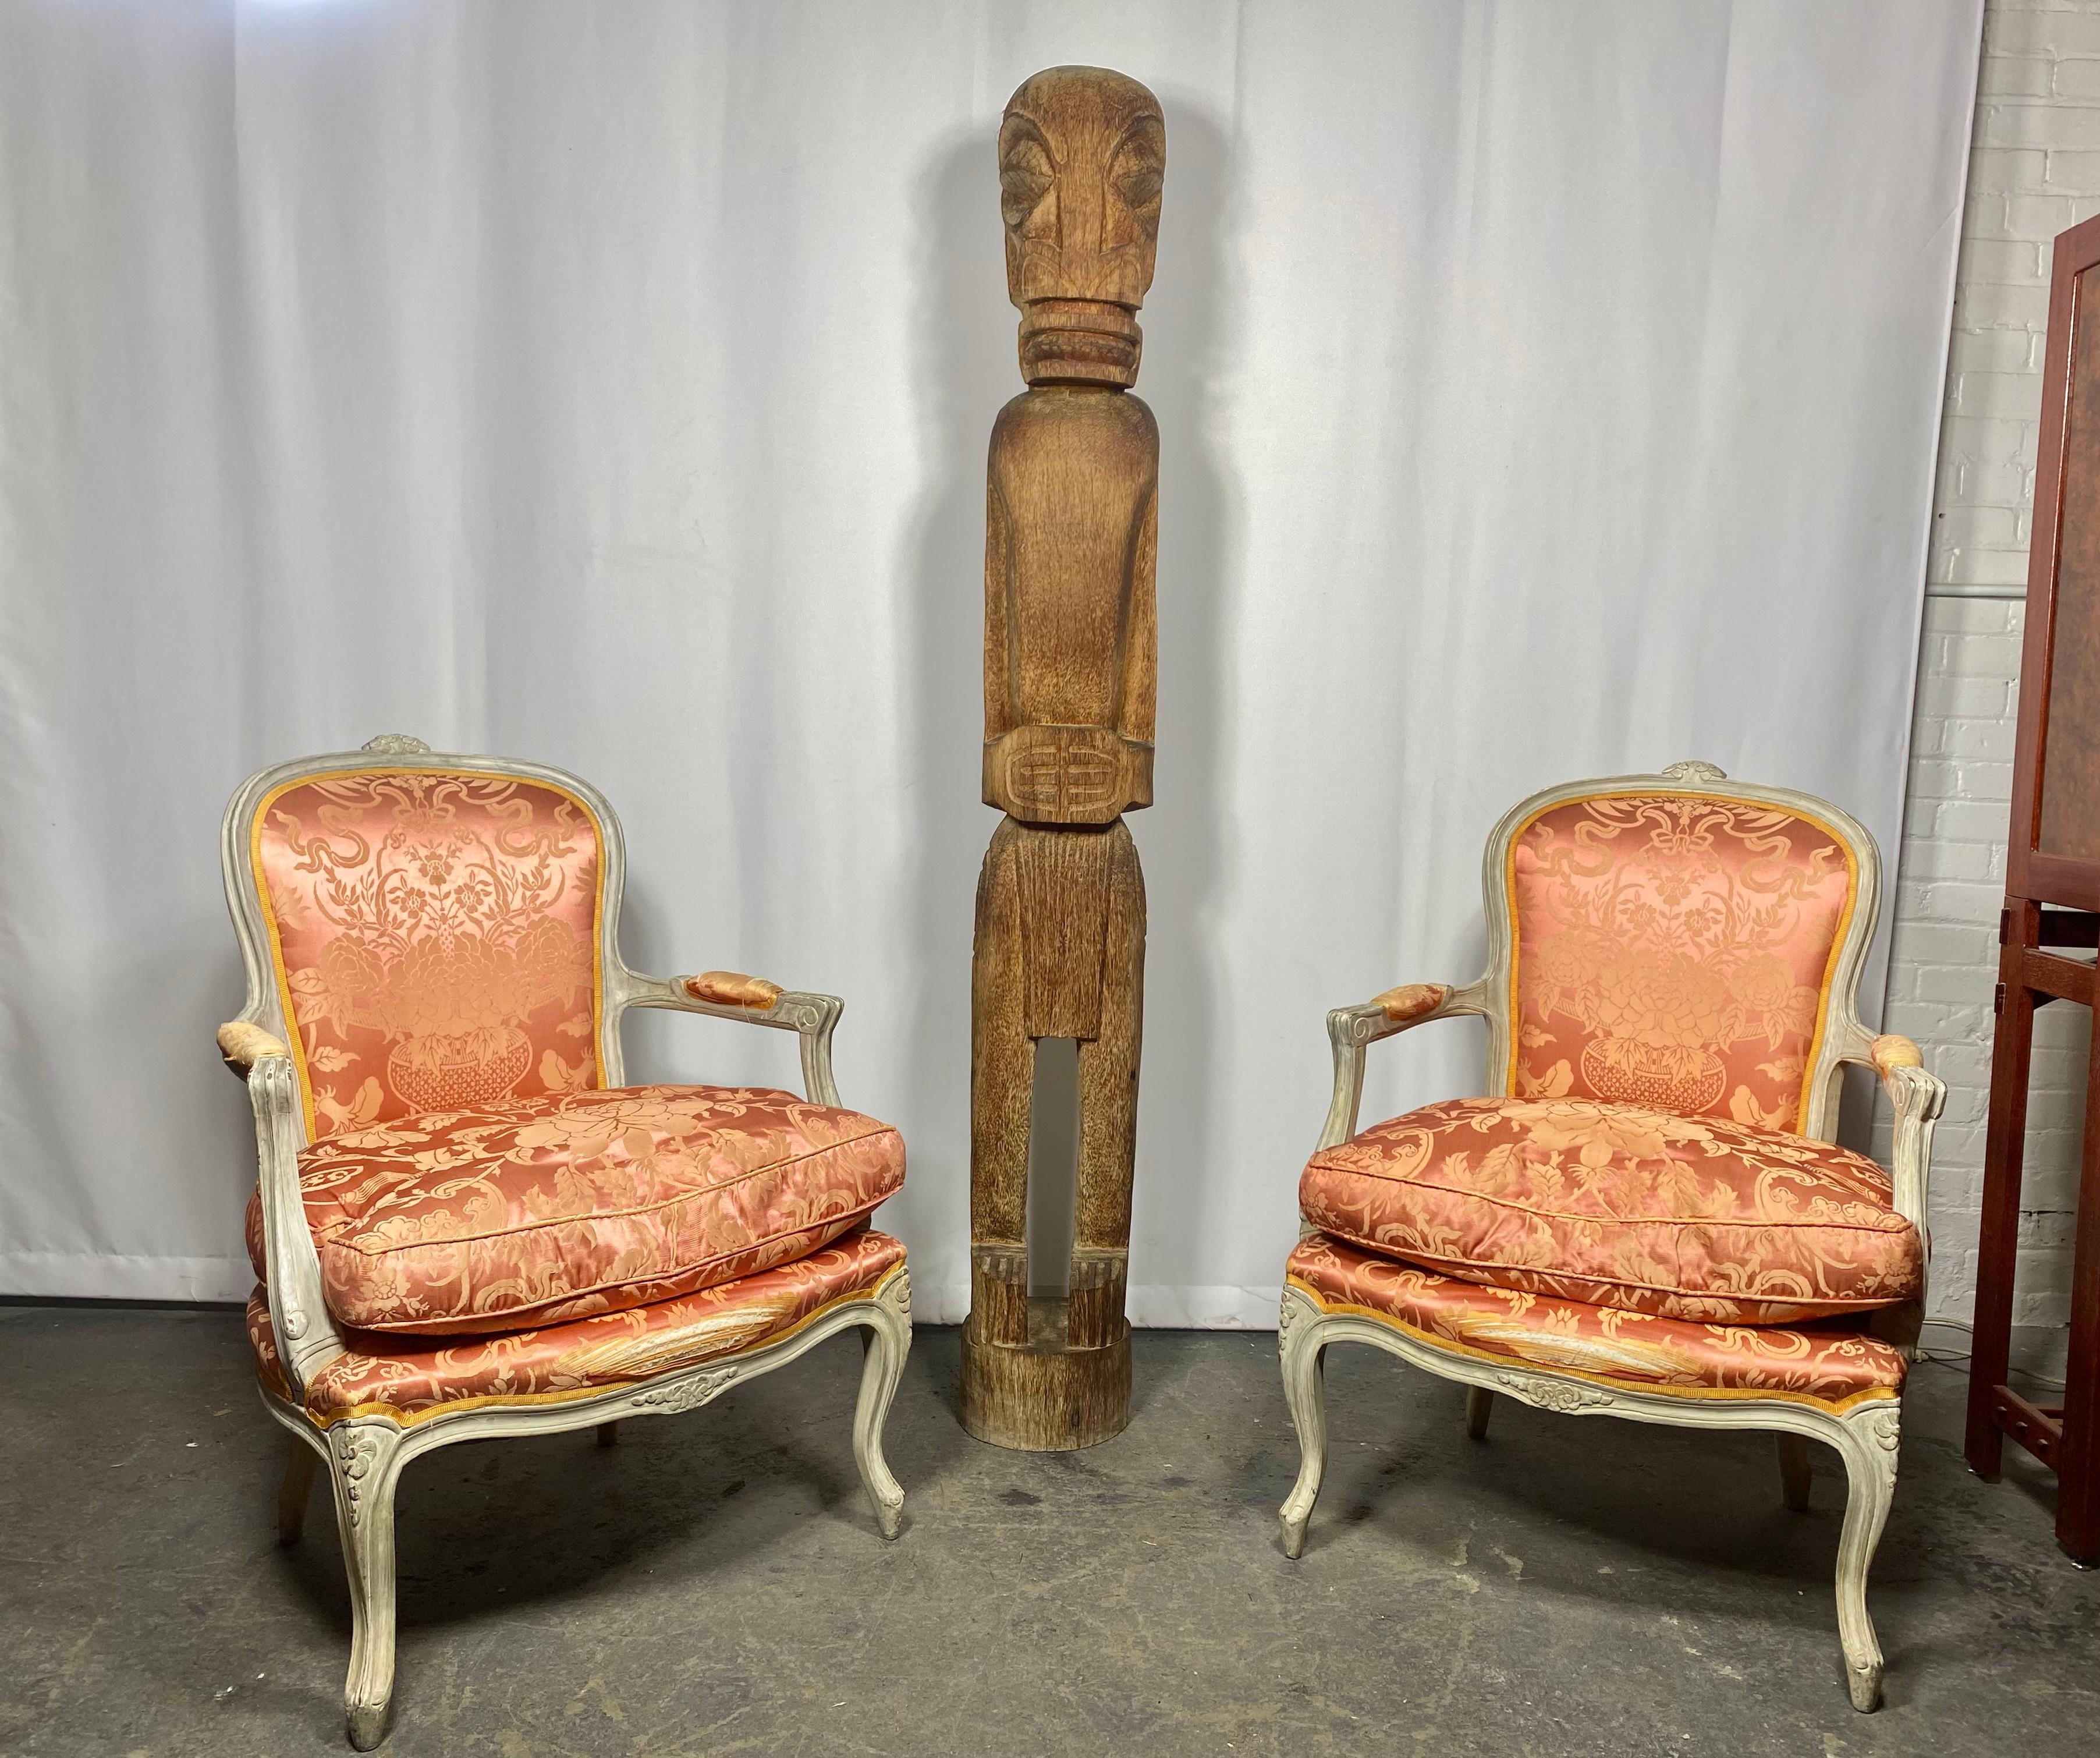 Pair of stunning carved Louis XV period bergères. Each chair features hand painted wood frames, a curved back, topped with a carved floral crest. This back flows seamlessly into the open scrolled arms with padded elbow rests and separate seat